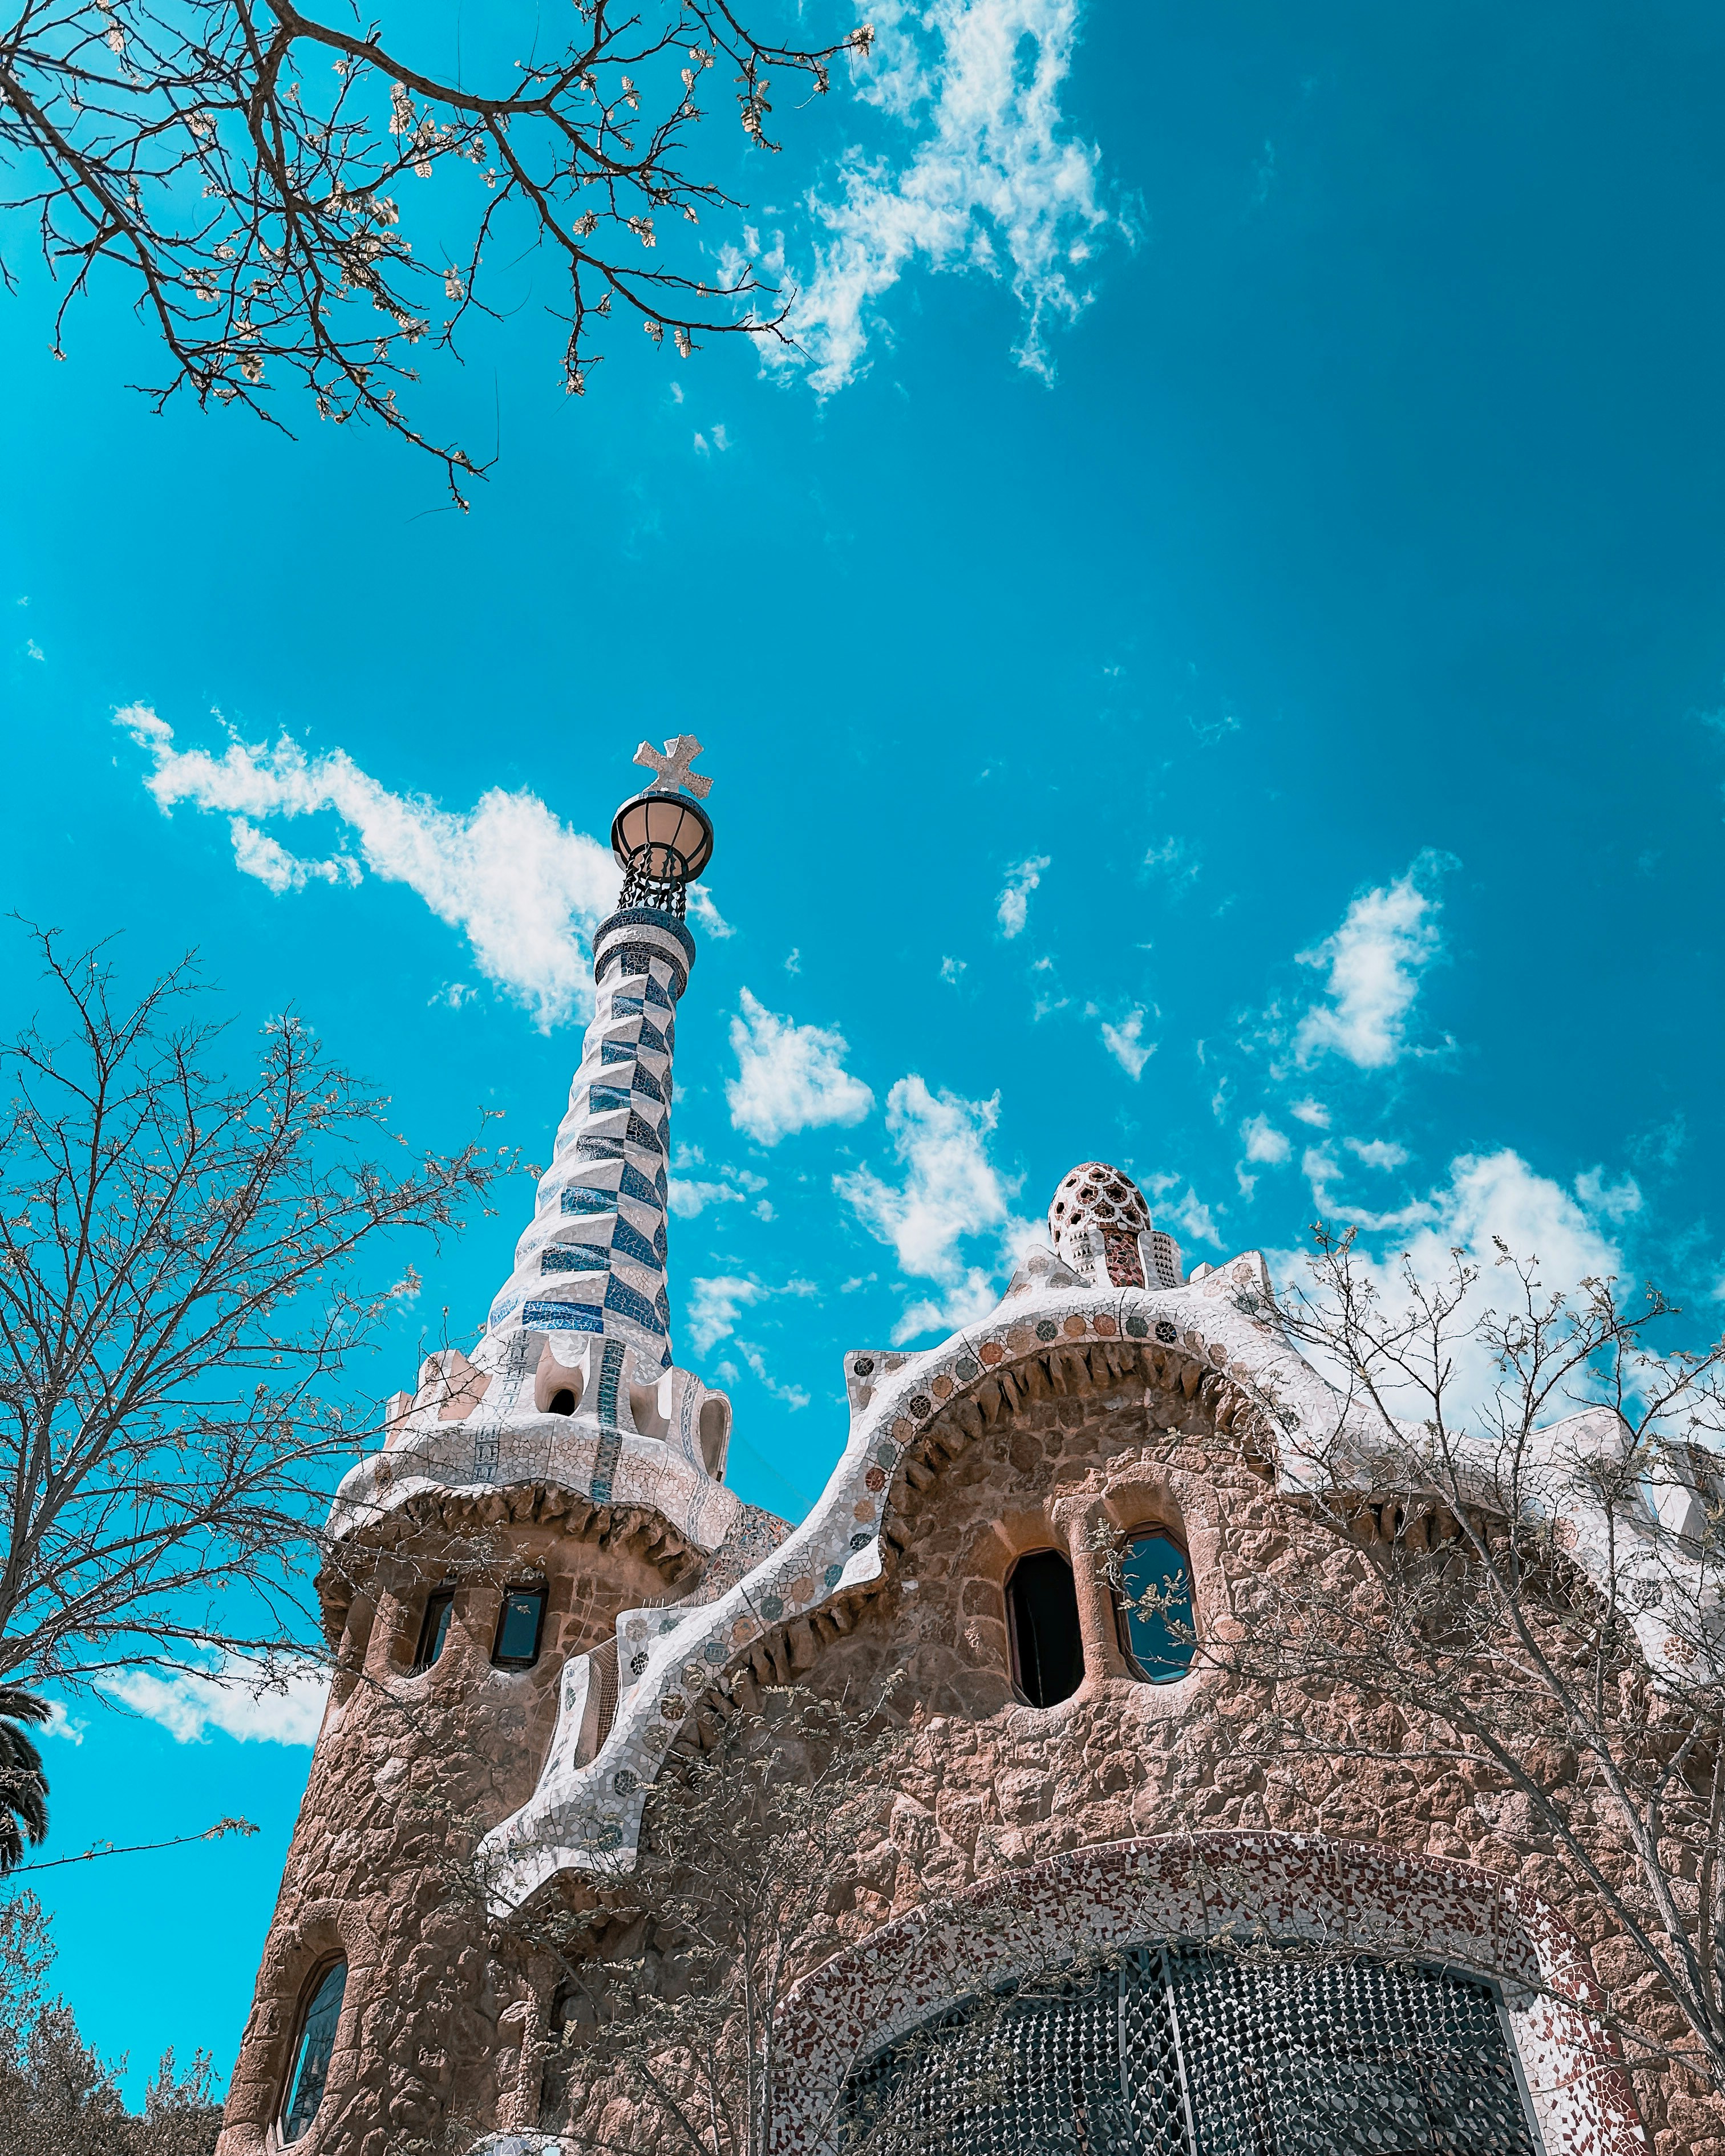 📍 Park Güell, Barcelona - More of the majestic Park Guell, this time more of the beautiful sculpted architecture atop. 🇪🇸